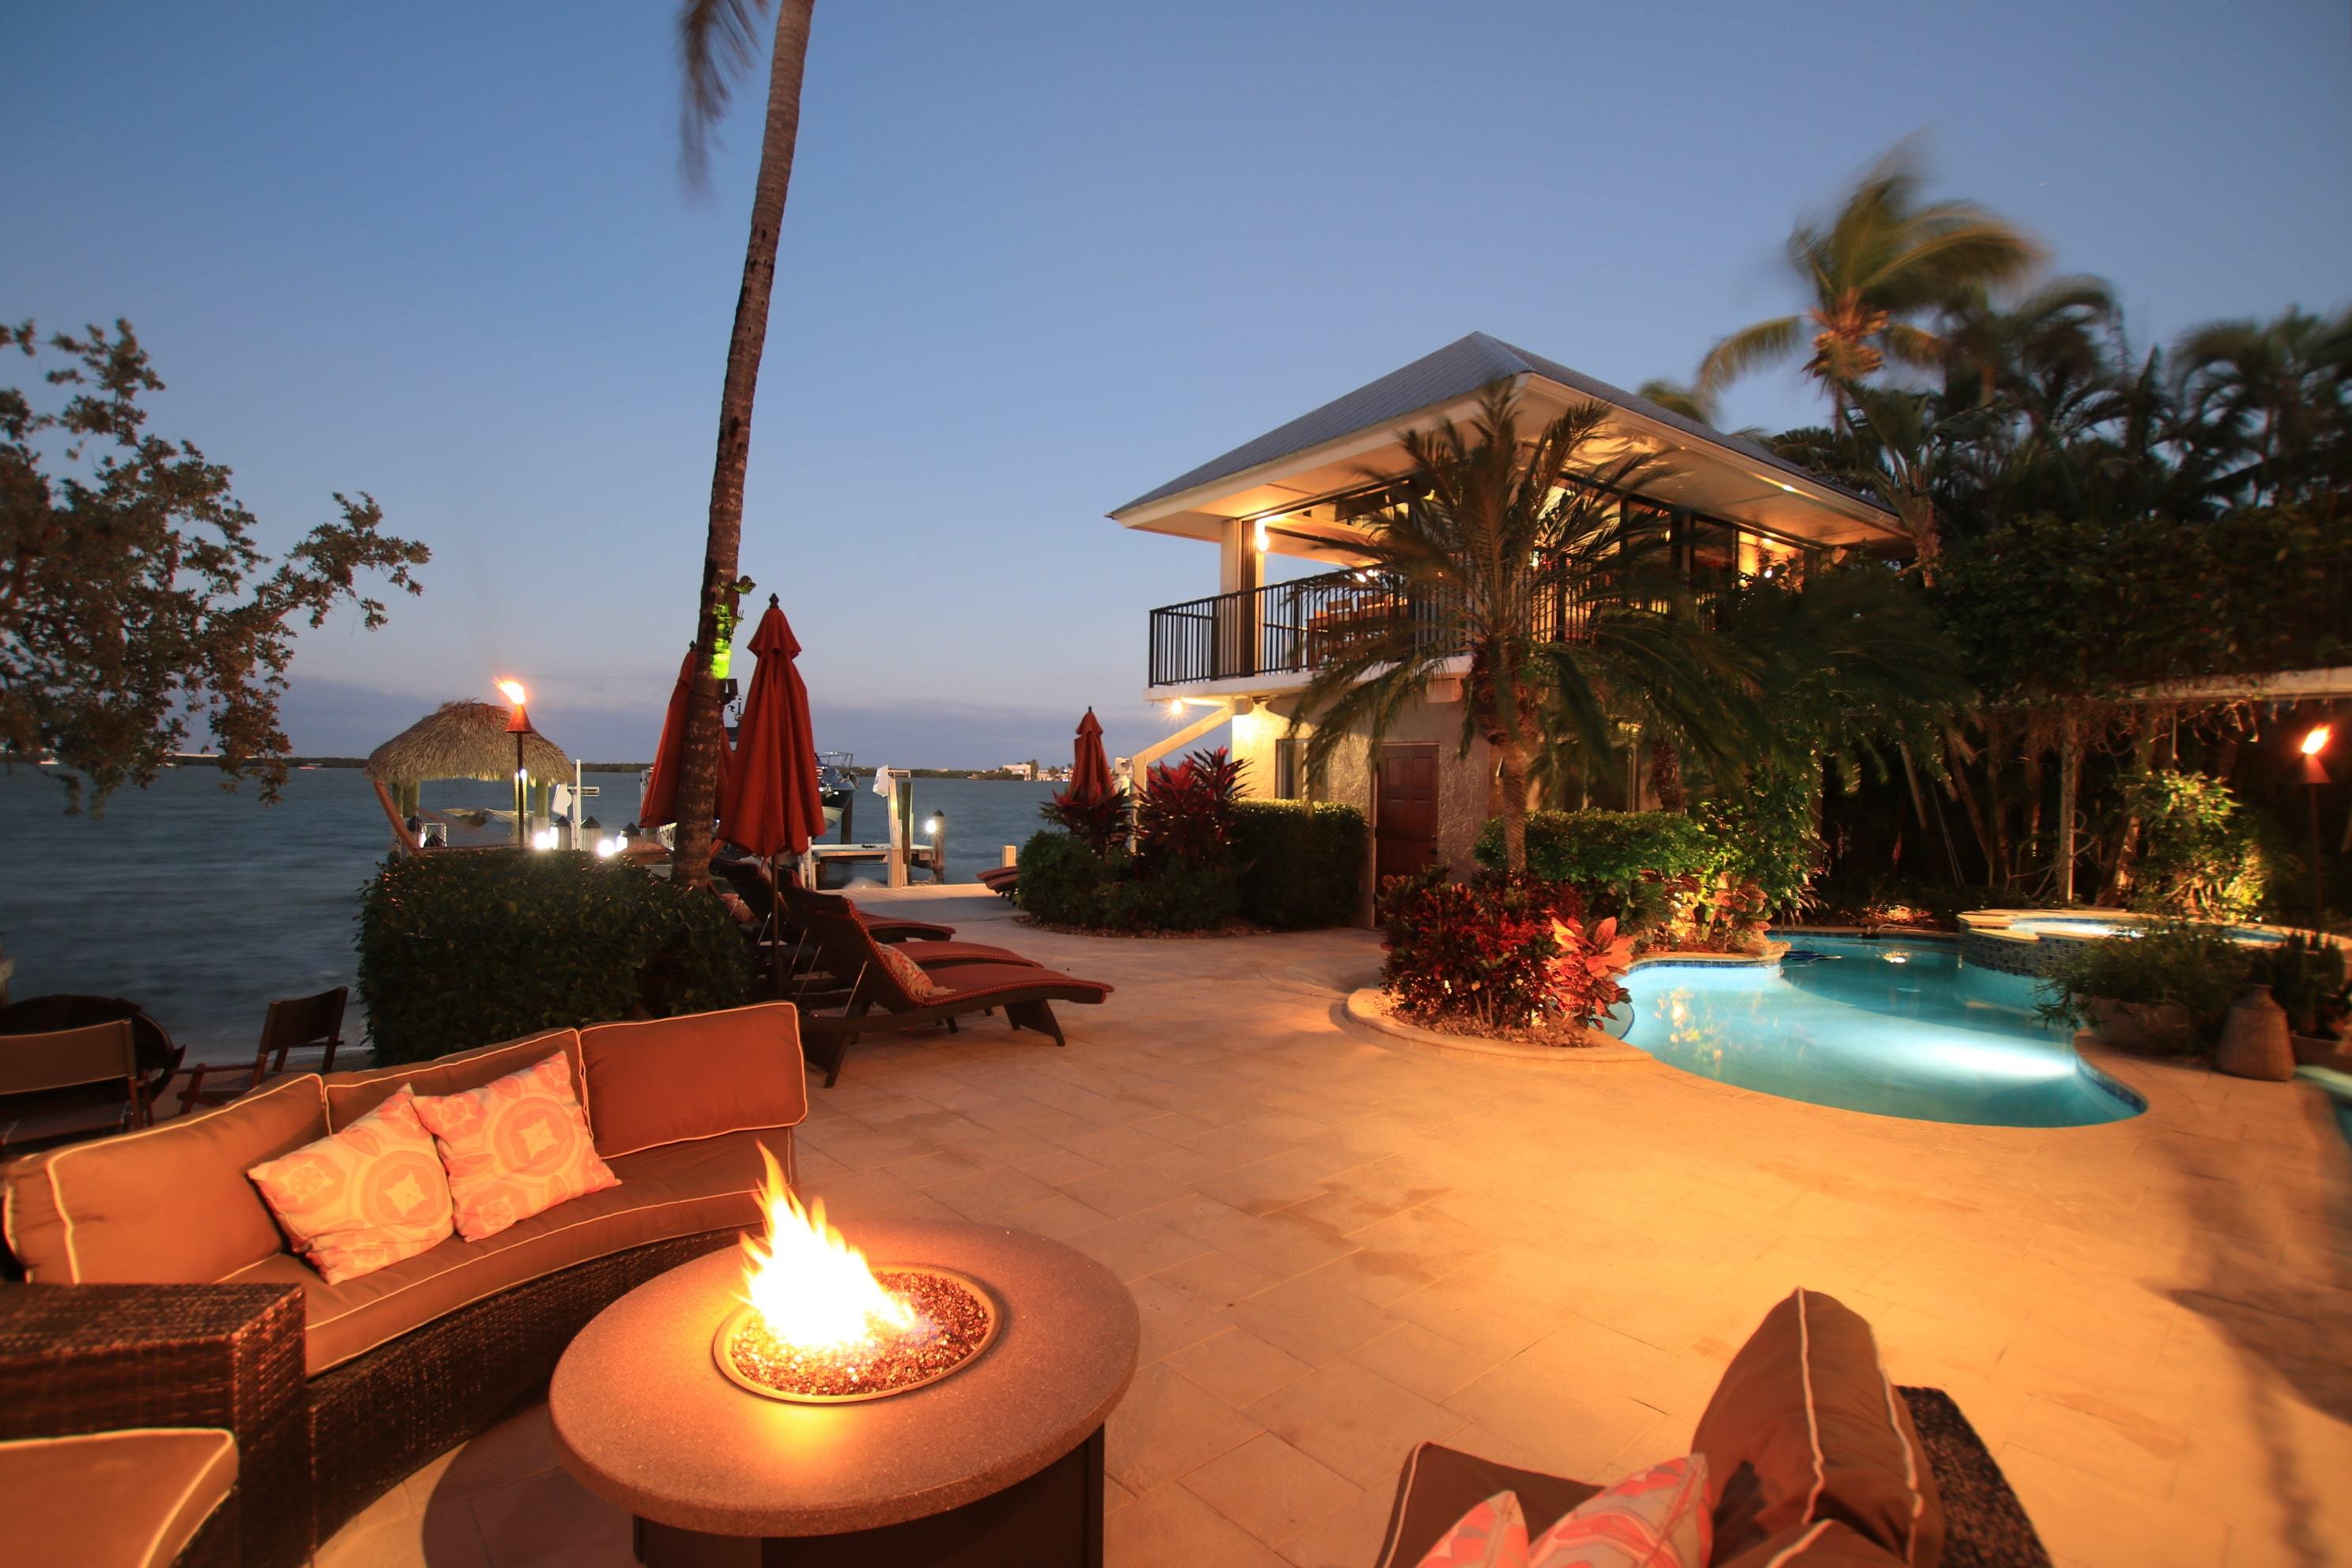 Luxury Florida Keys backyard, with views of the waterfront at nighttime